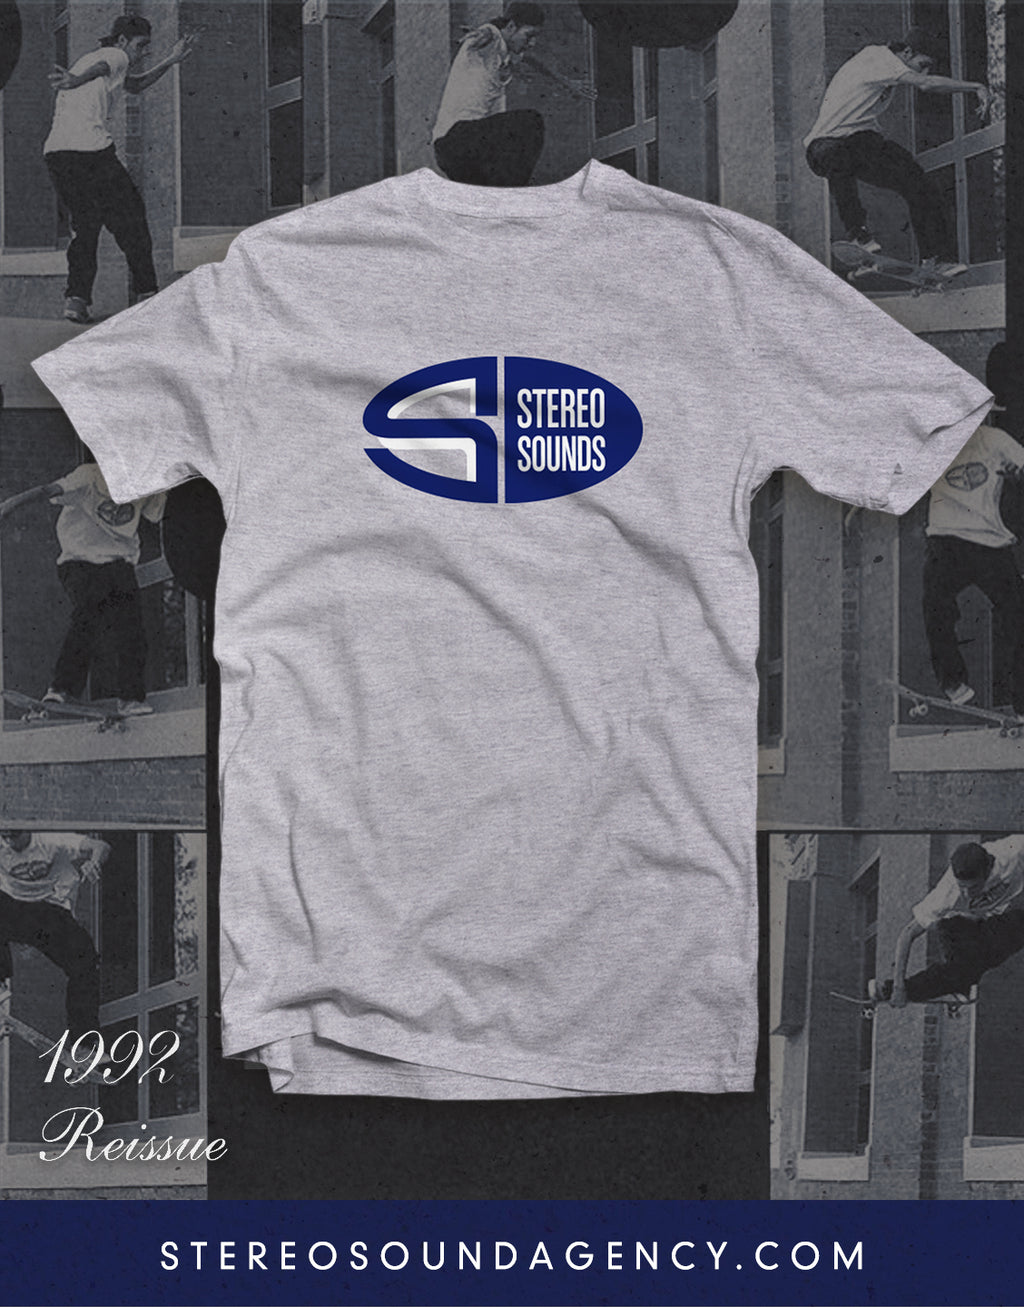 Stereo Sounds "Oval" 1993 REISSUE Tee: Heather Grey/Navy